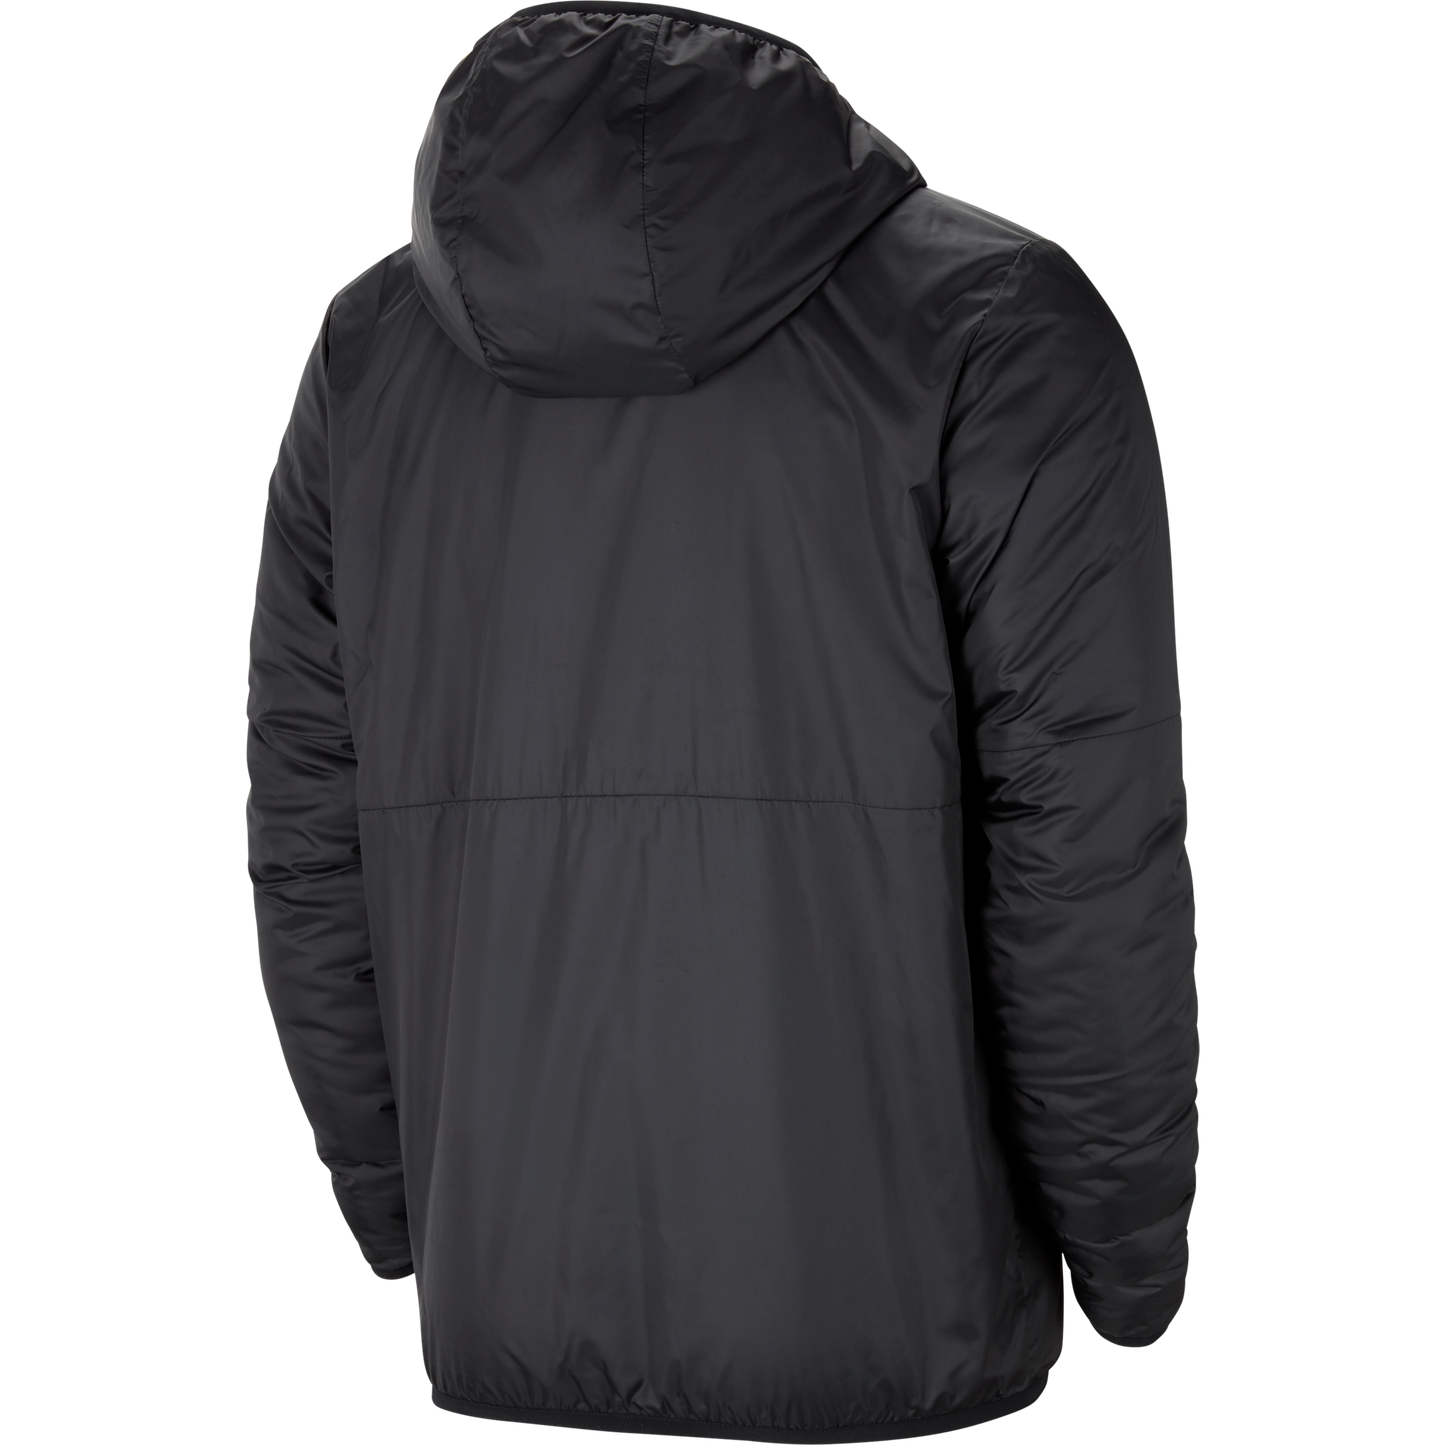 WOODLEIGH FC NIKE THERMAL FALL JACKET - WOMEN'S